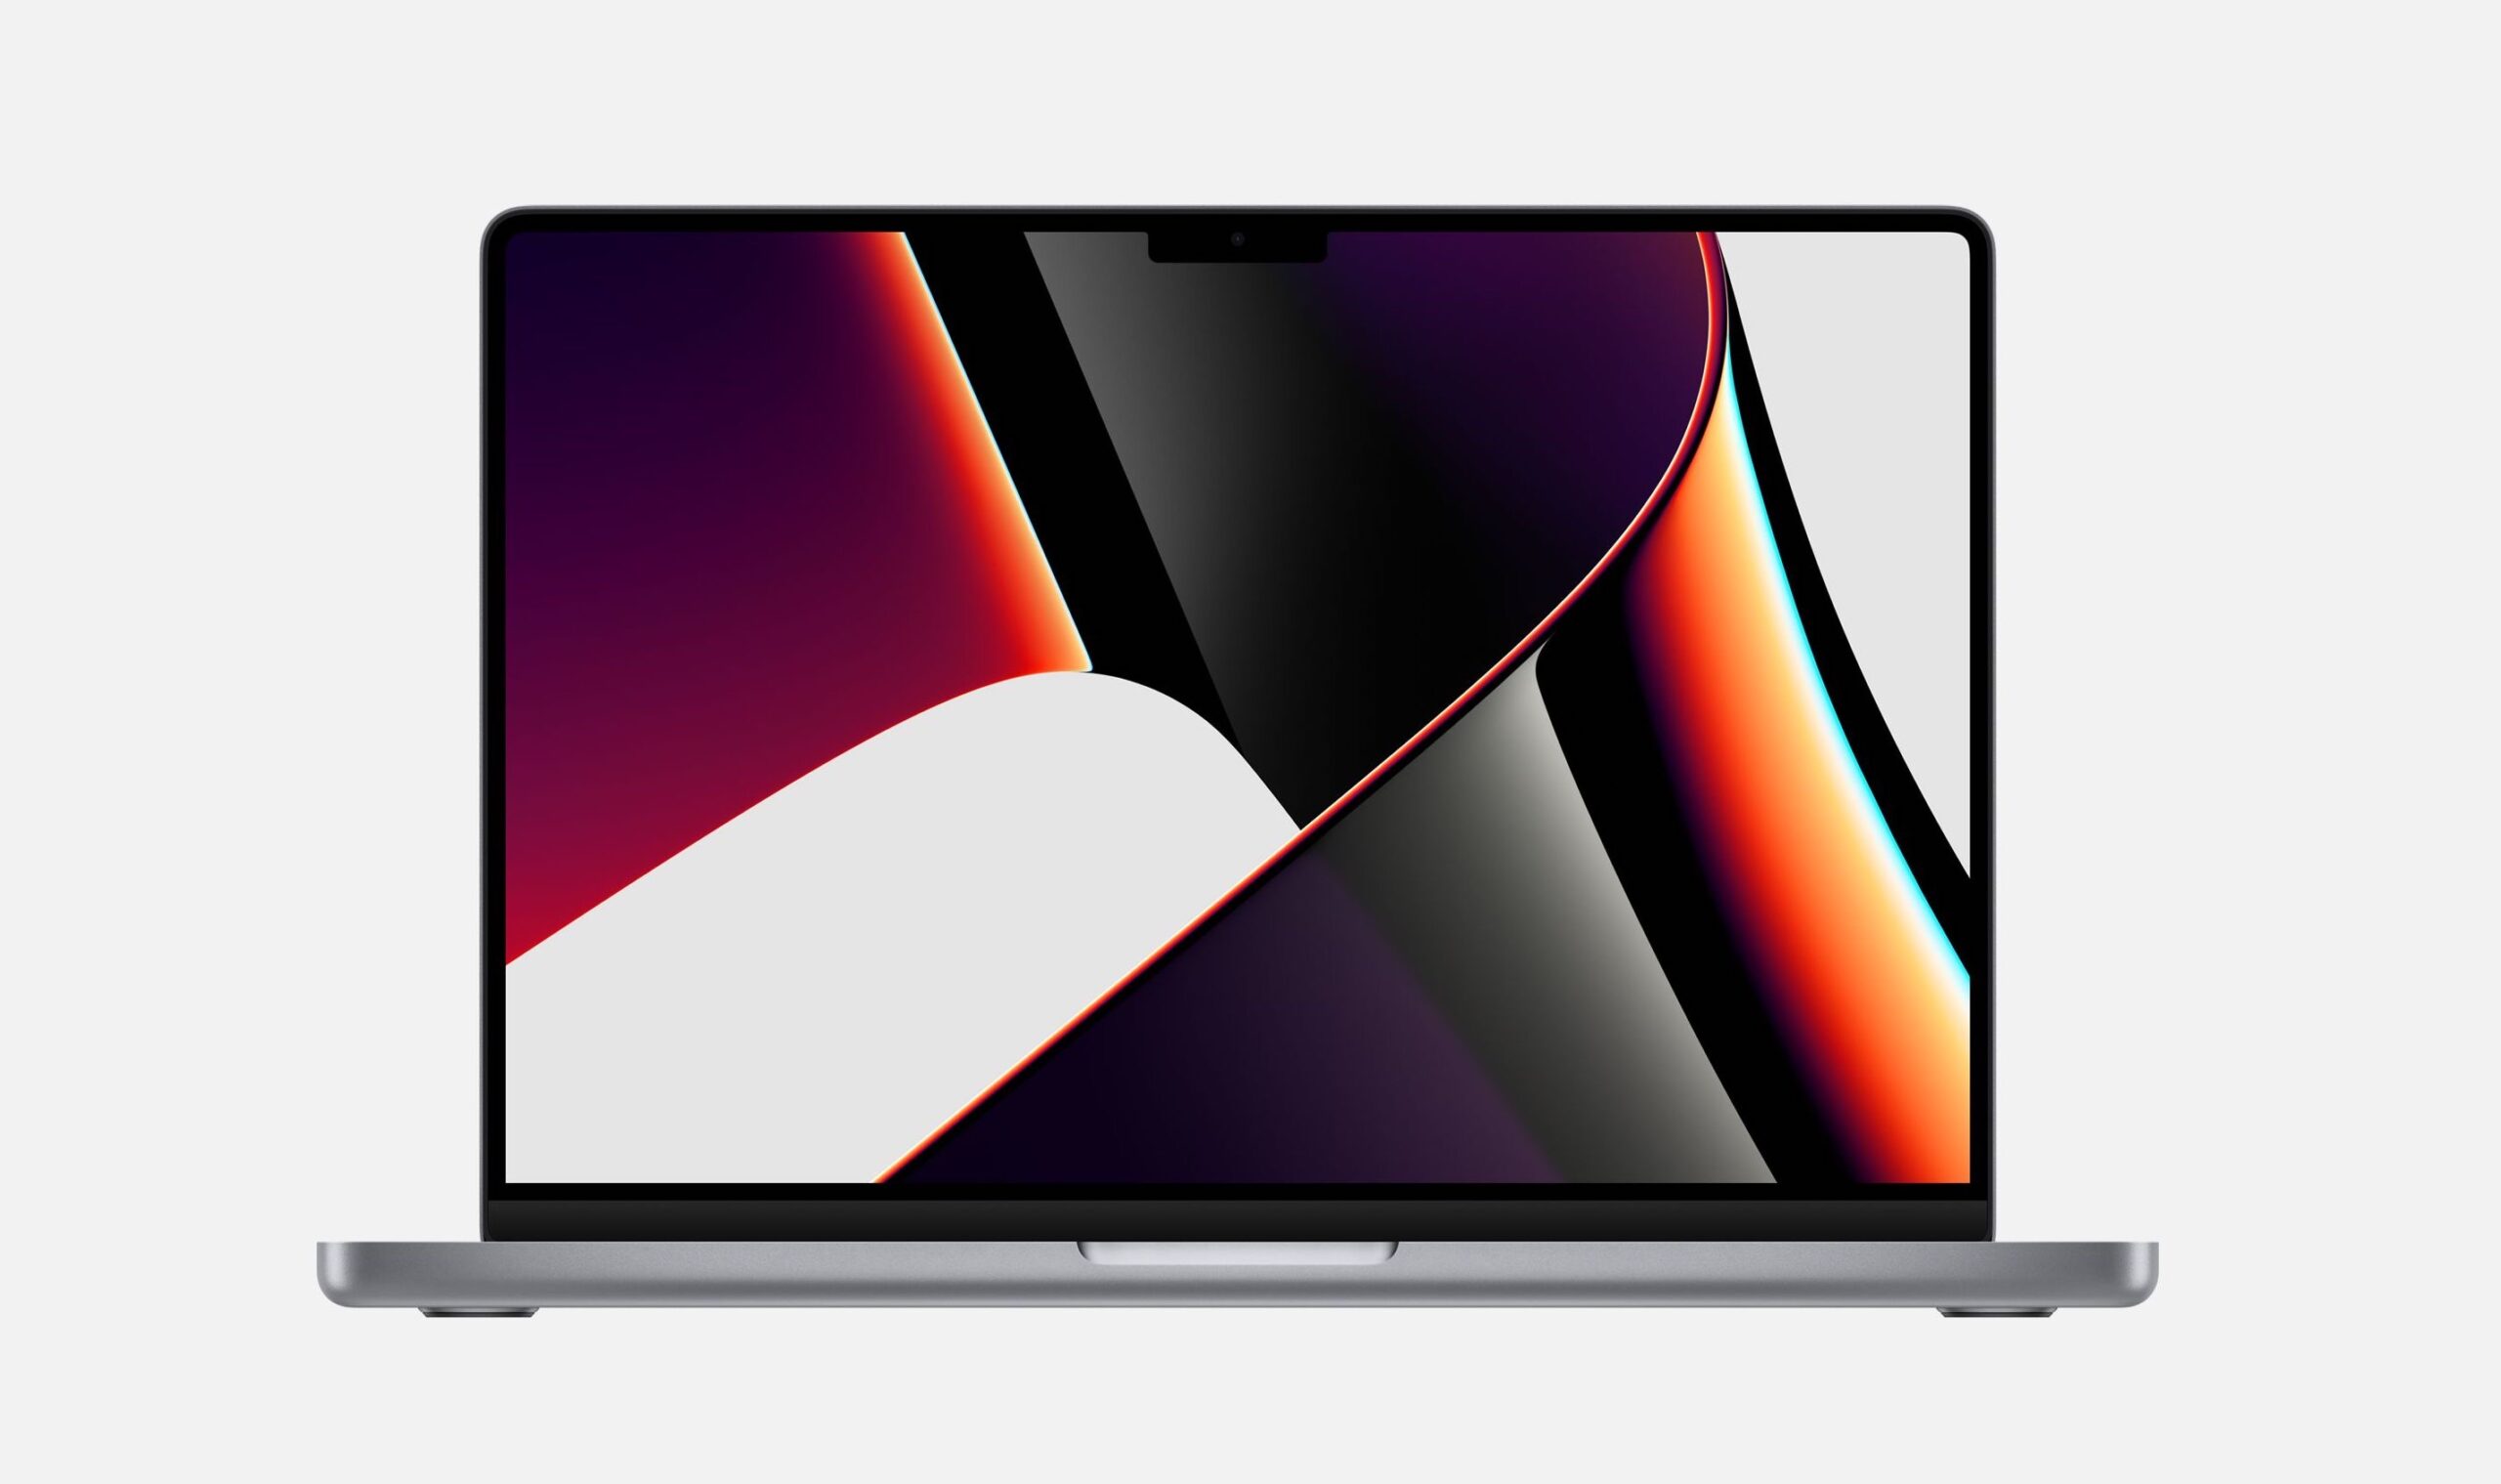 Mbp14 spacegray gallery2 202110